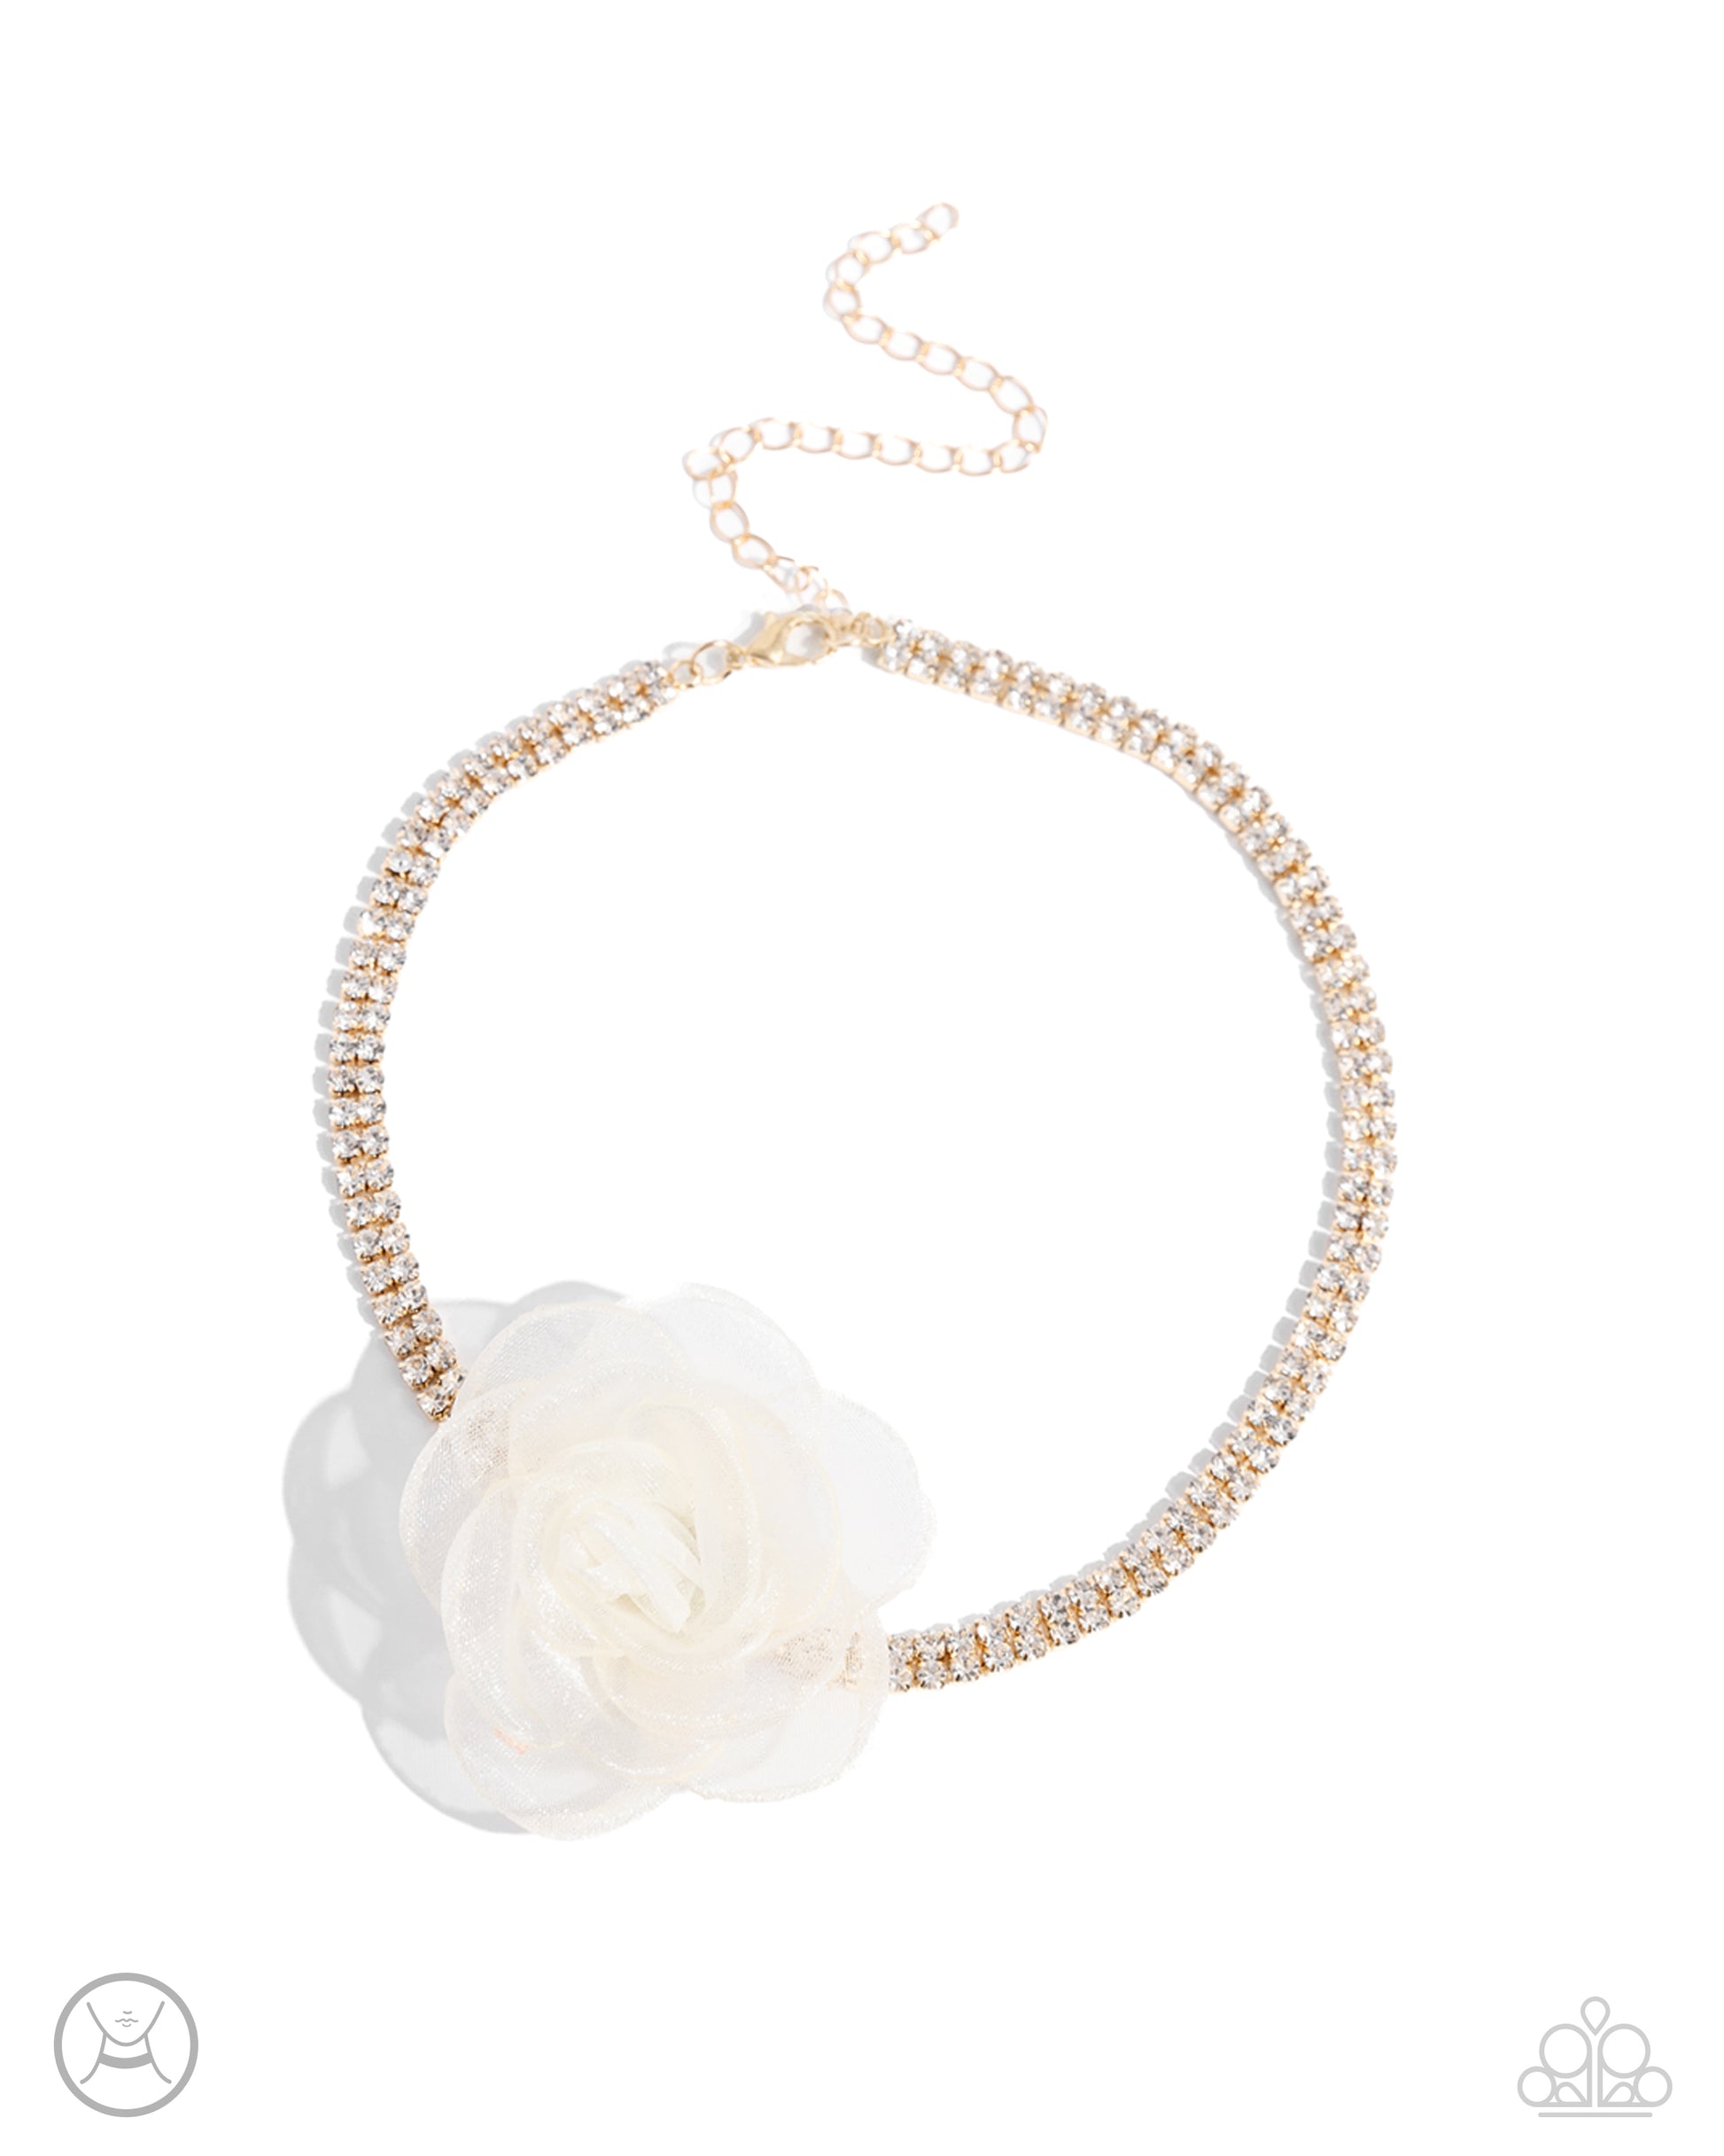 <p>A double-stranded gold chain is embellished with two rows of glistening white rhinestones as it wraps around the collar. An ivory tulle rosette is placed in the center of the design for a floral finish. Features an adjustable clasp closure.</p> <p><i>Sold as one individual choker necklace. Includes one pair of matching earrings. </i></p> &nbsp;<img src="https://d9b54x484lq62.cloudfront.net/paparazzi/shopping/images/517_chokericon_1.jpg" alt="Choker" align="middle" height="50" width="50">